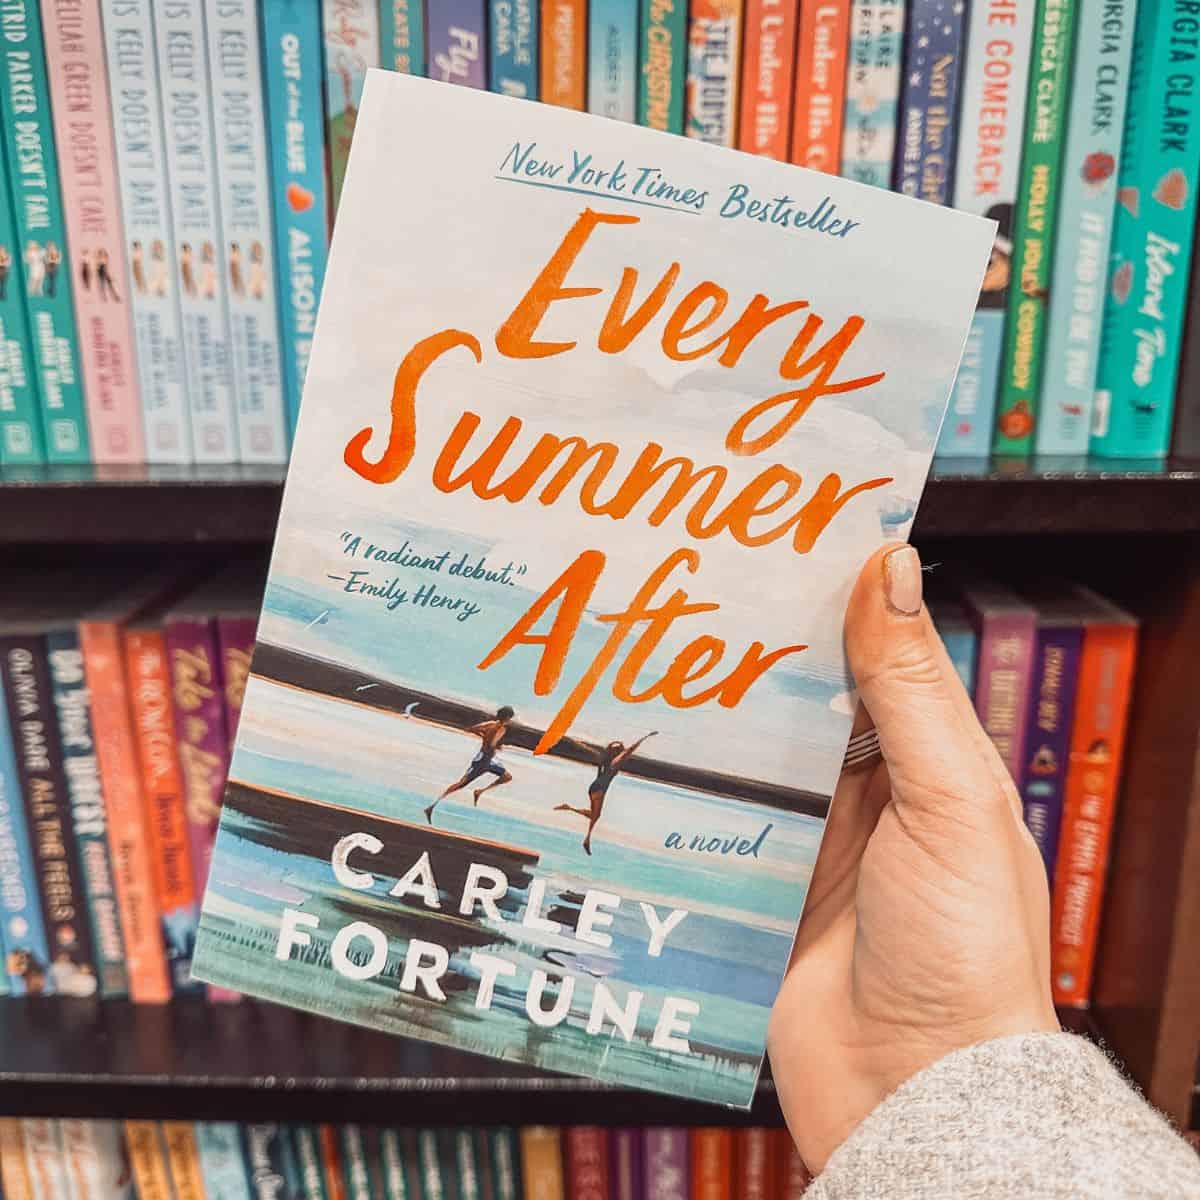 Every Summer After: Summary & Review of Carley Fortune’s Book